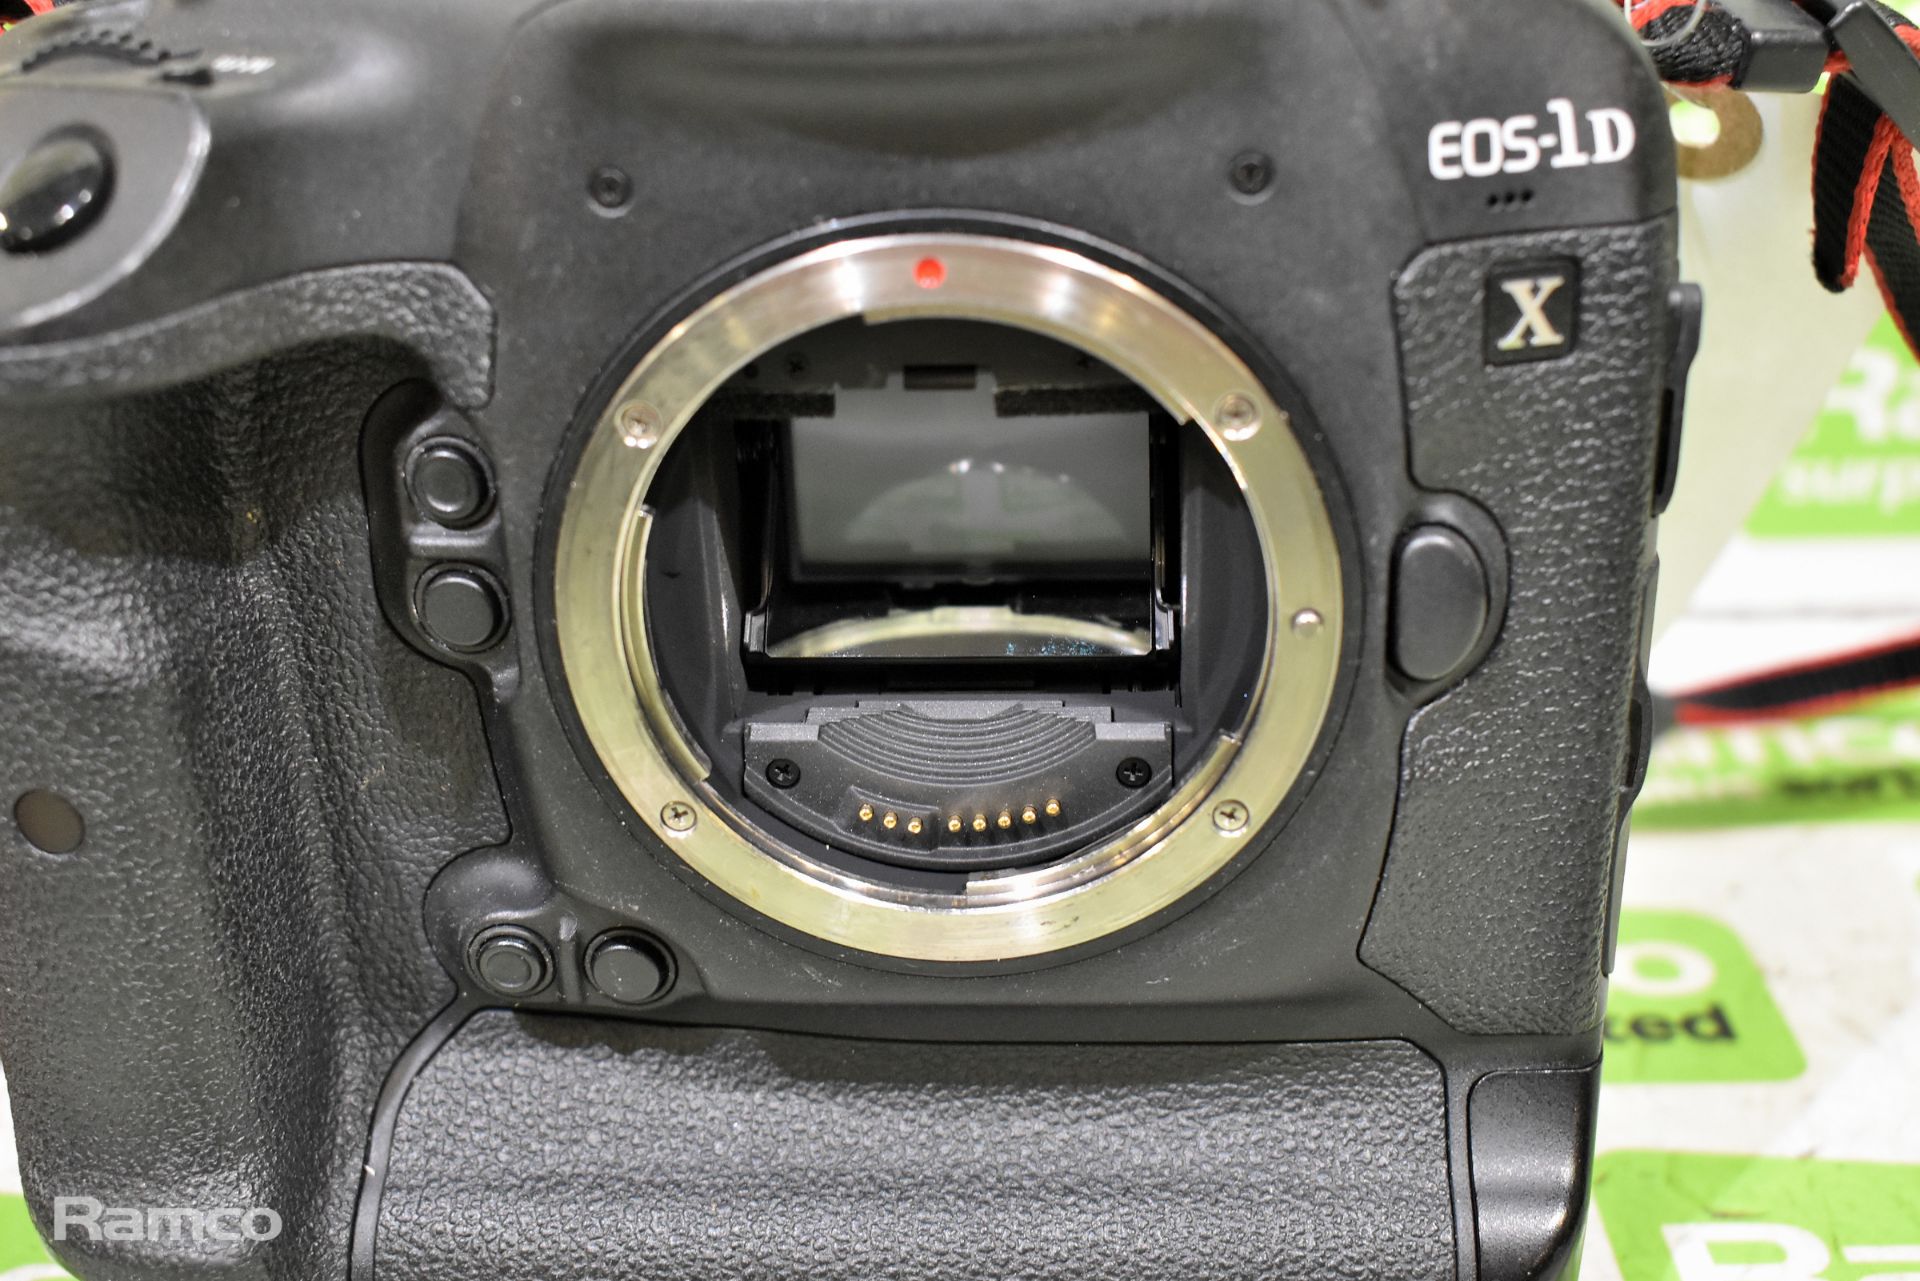 Canon EOS-1DX DSLR camera with battery and strap - Image 2 of 8